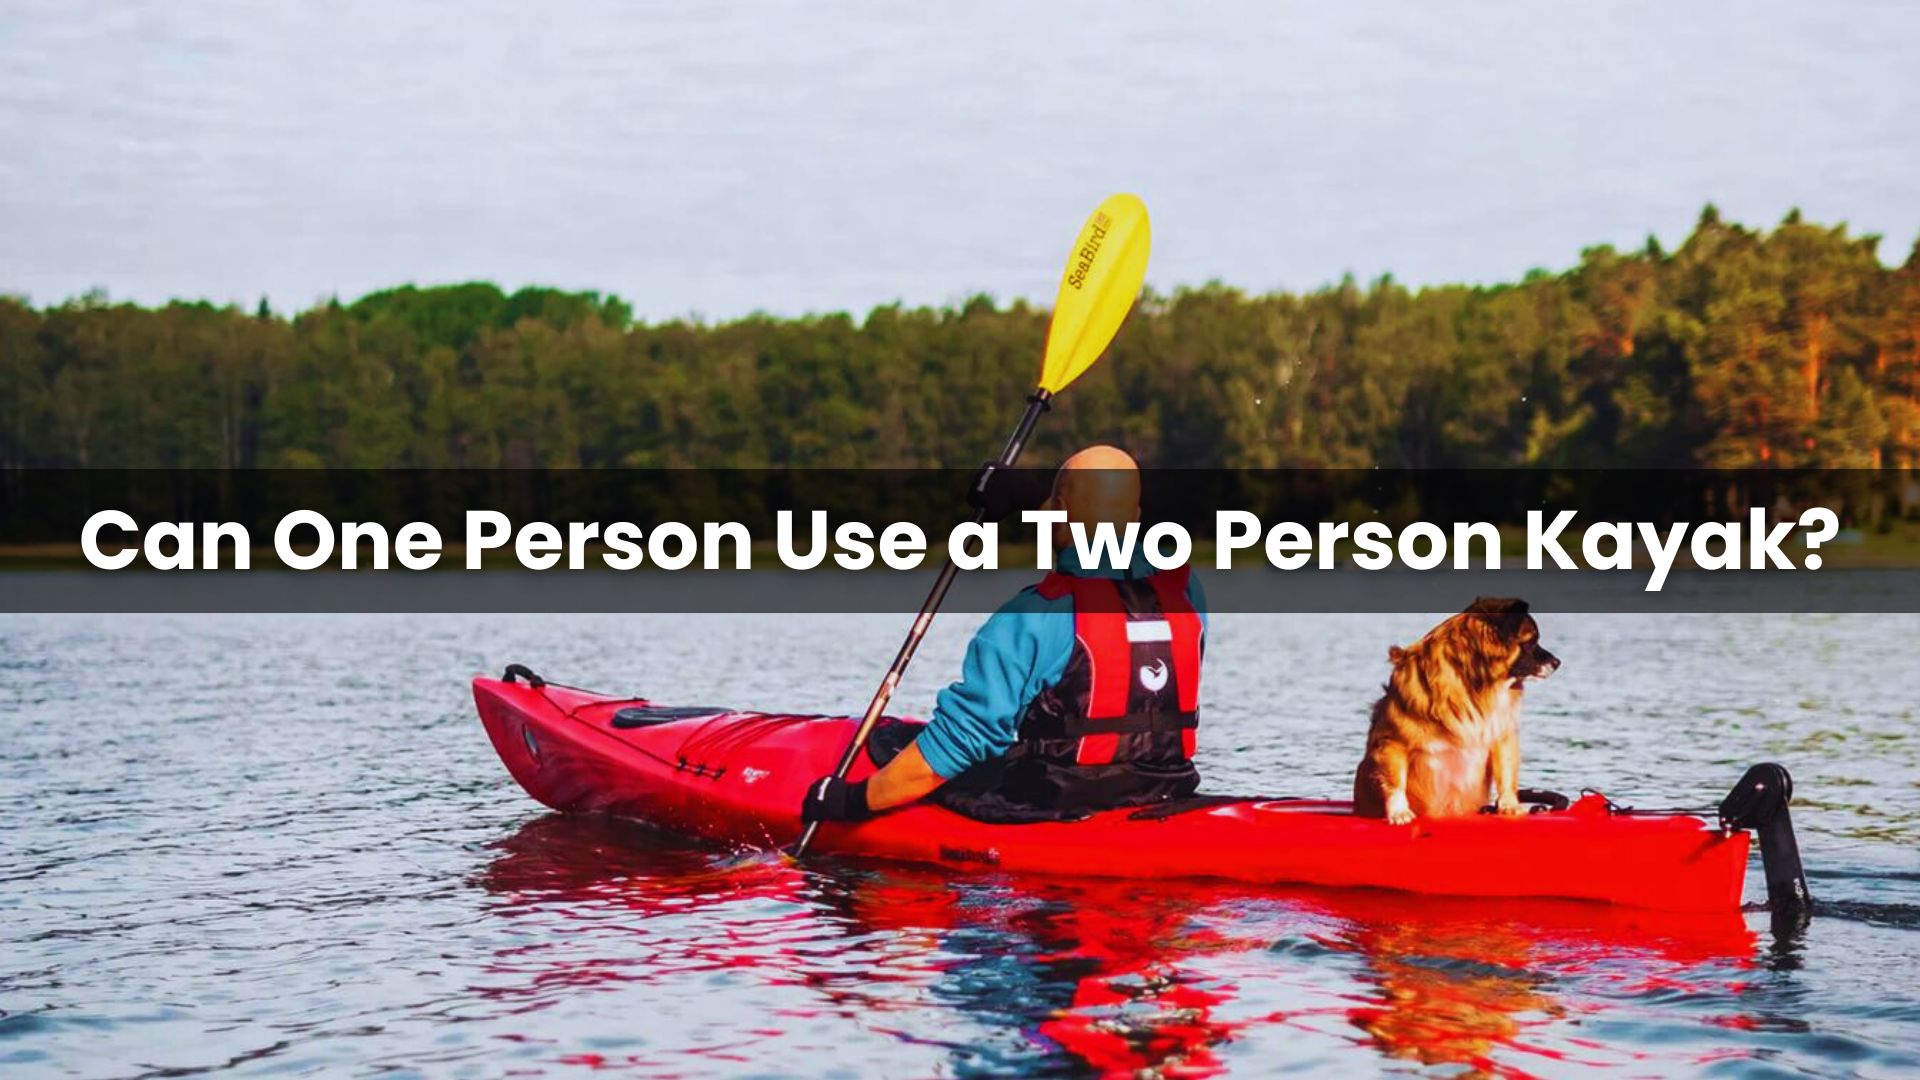 Can One Person Use a Two Person Kayak